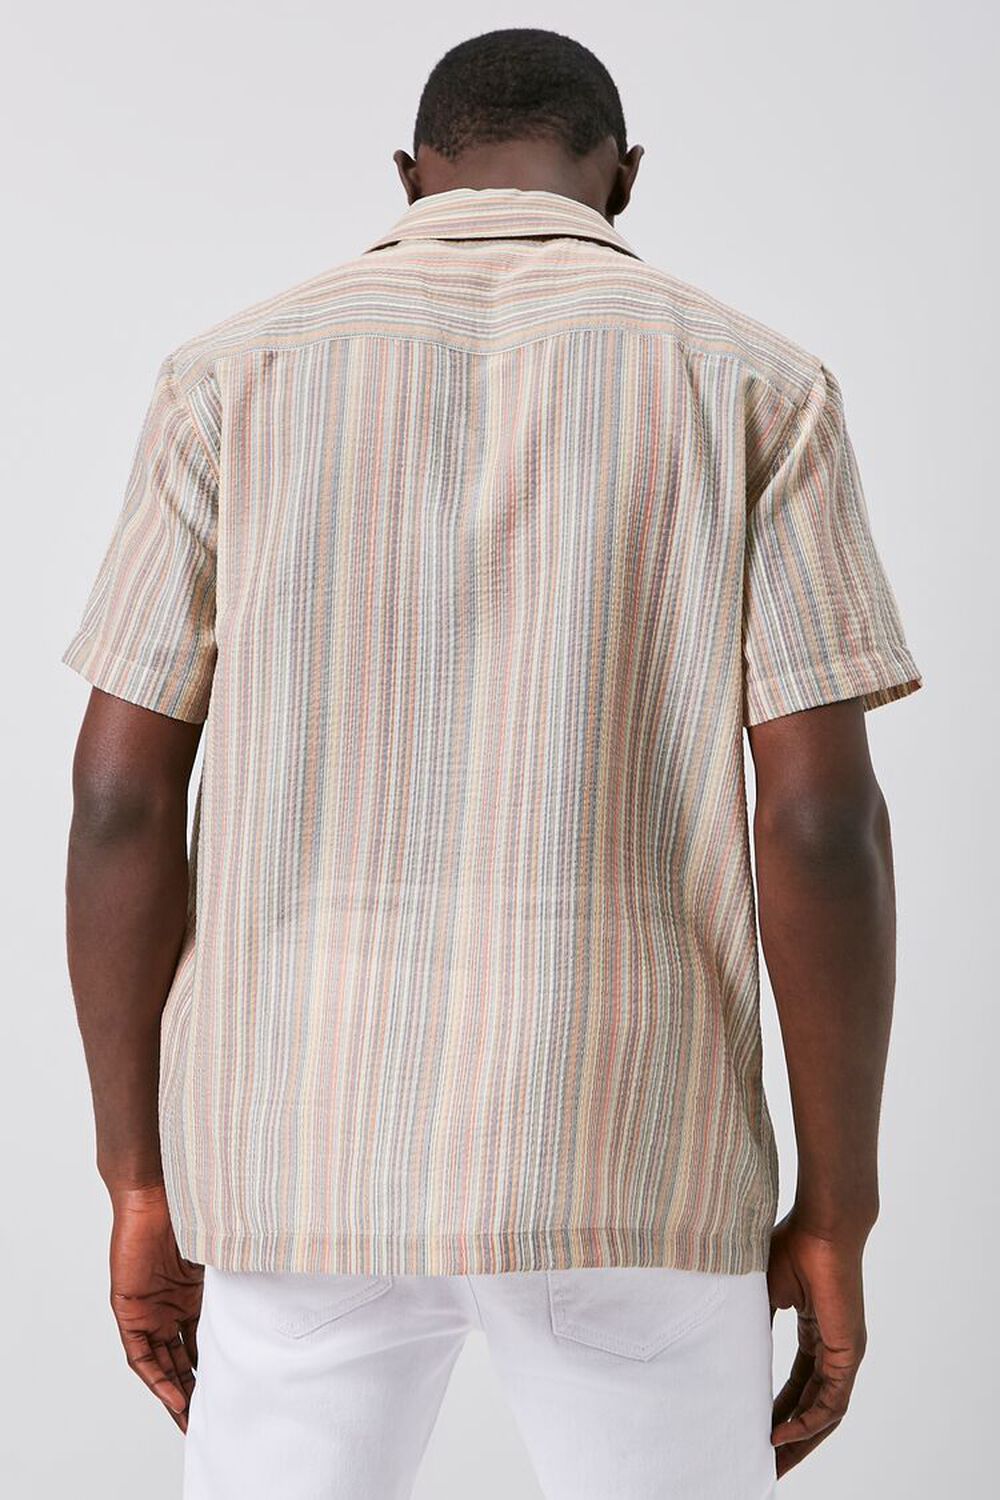 TAUPE/MULTI Classic Fit Striped Print Shirt, image 3